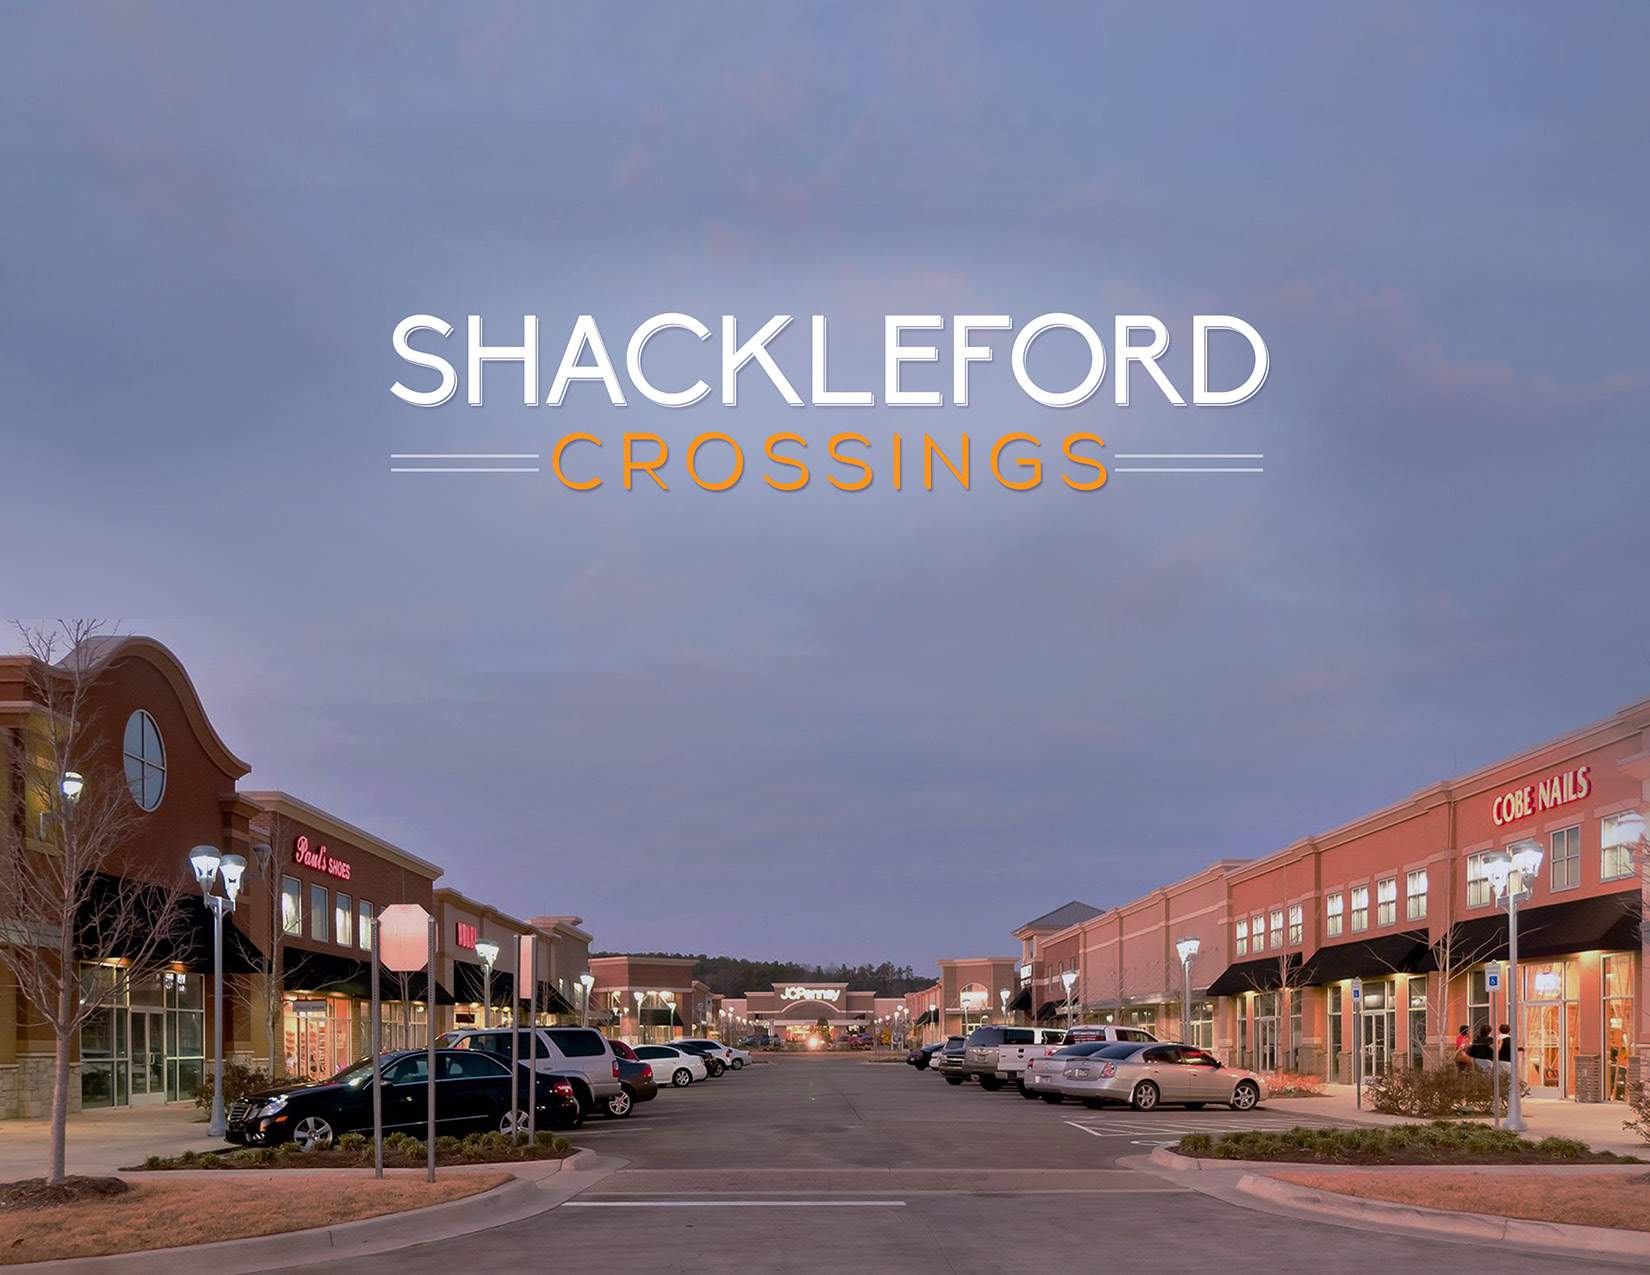 Shackleford Crossings: The Place to be for Some Summertime Fun Image